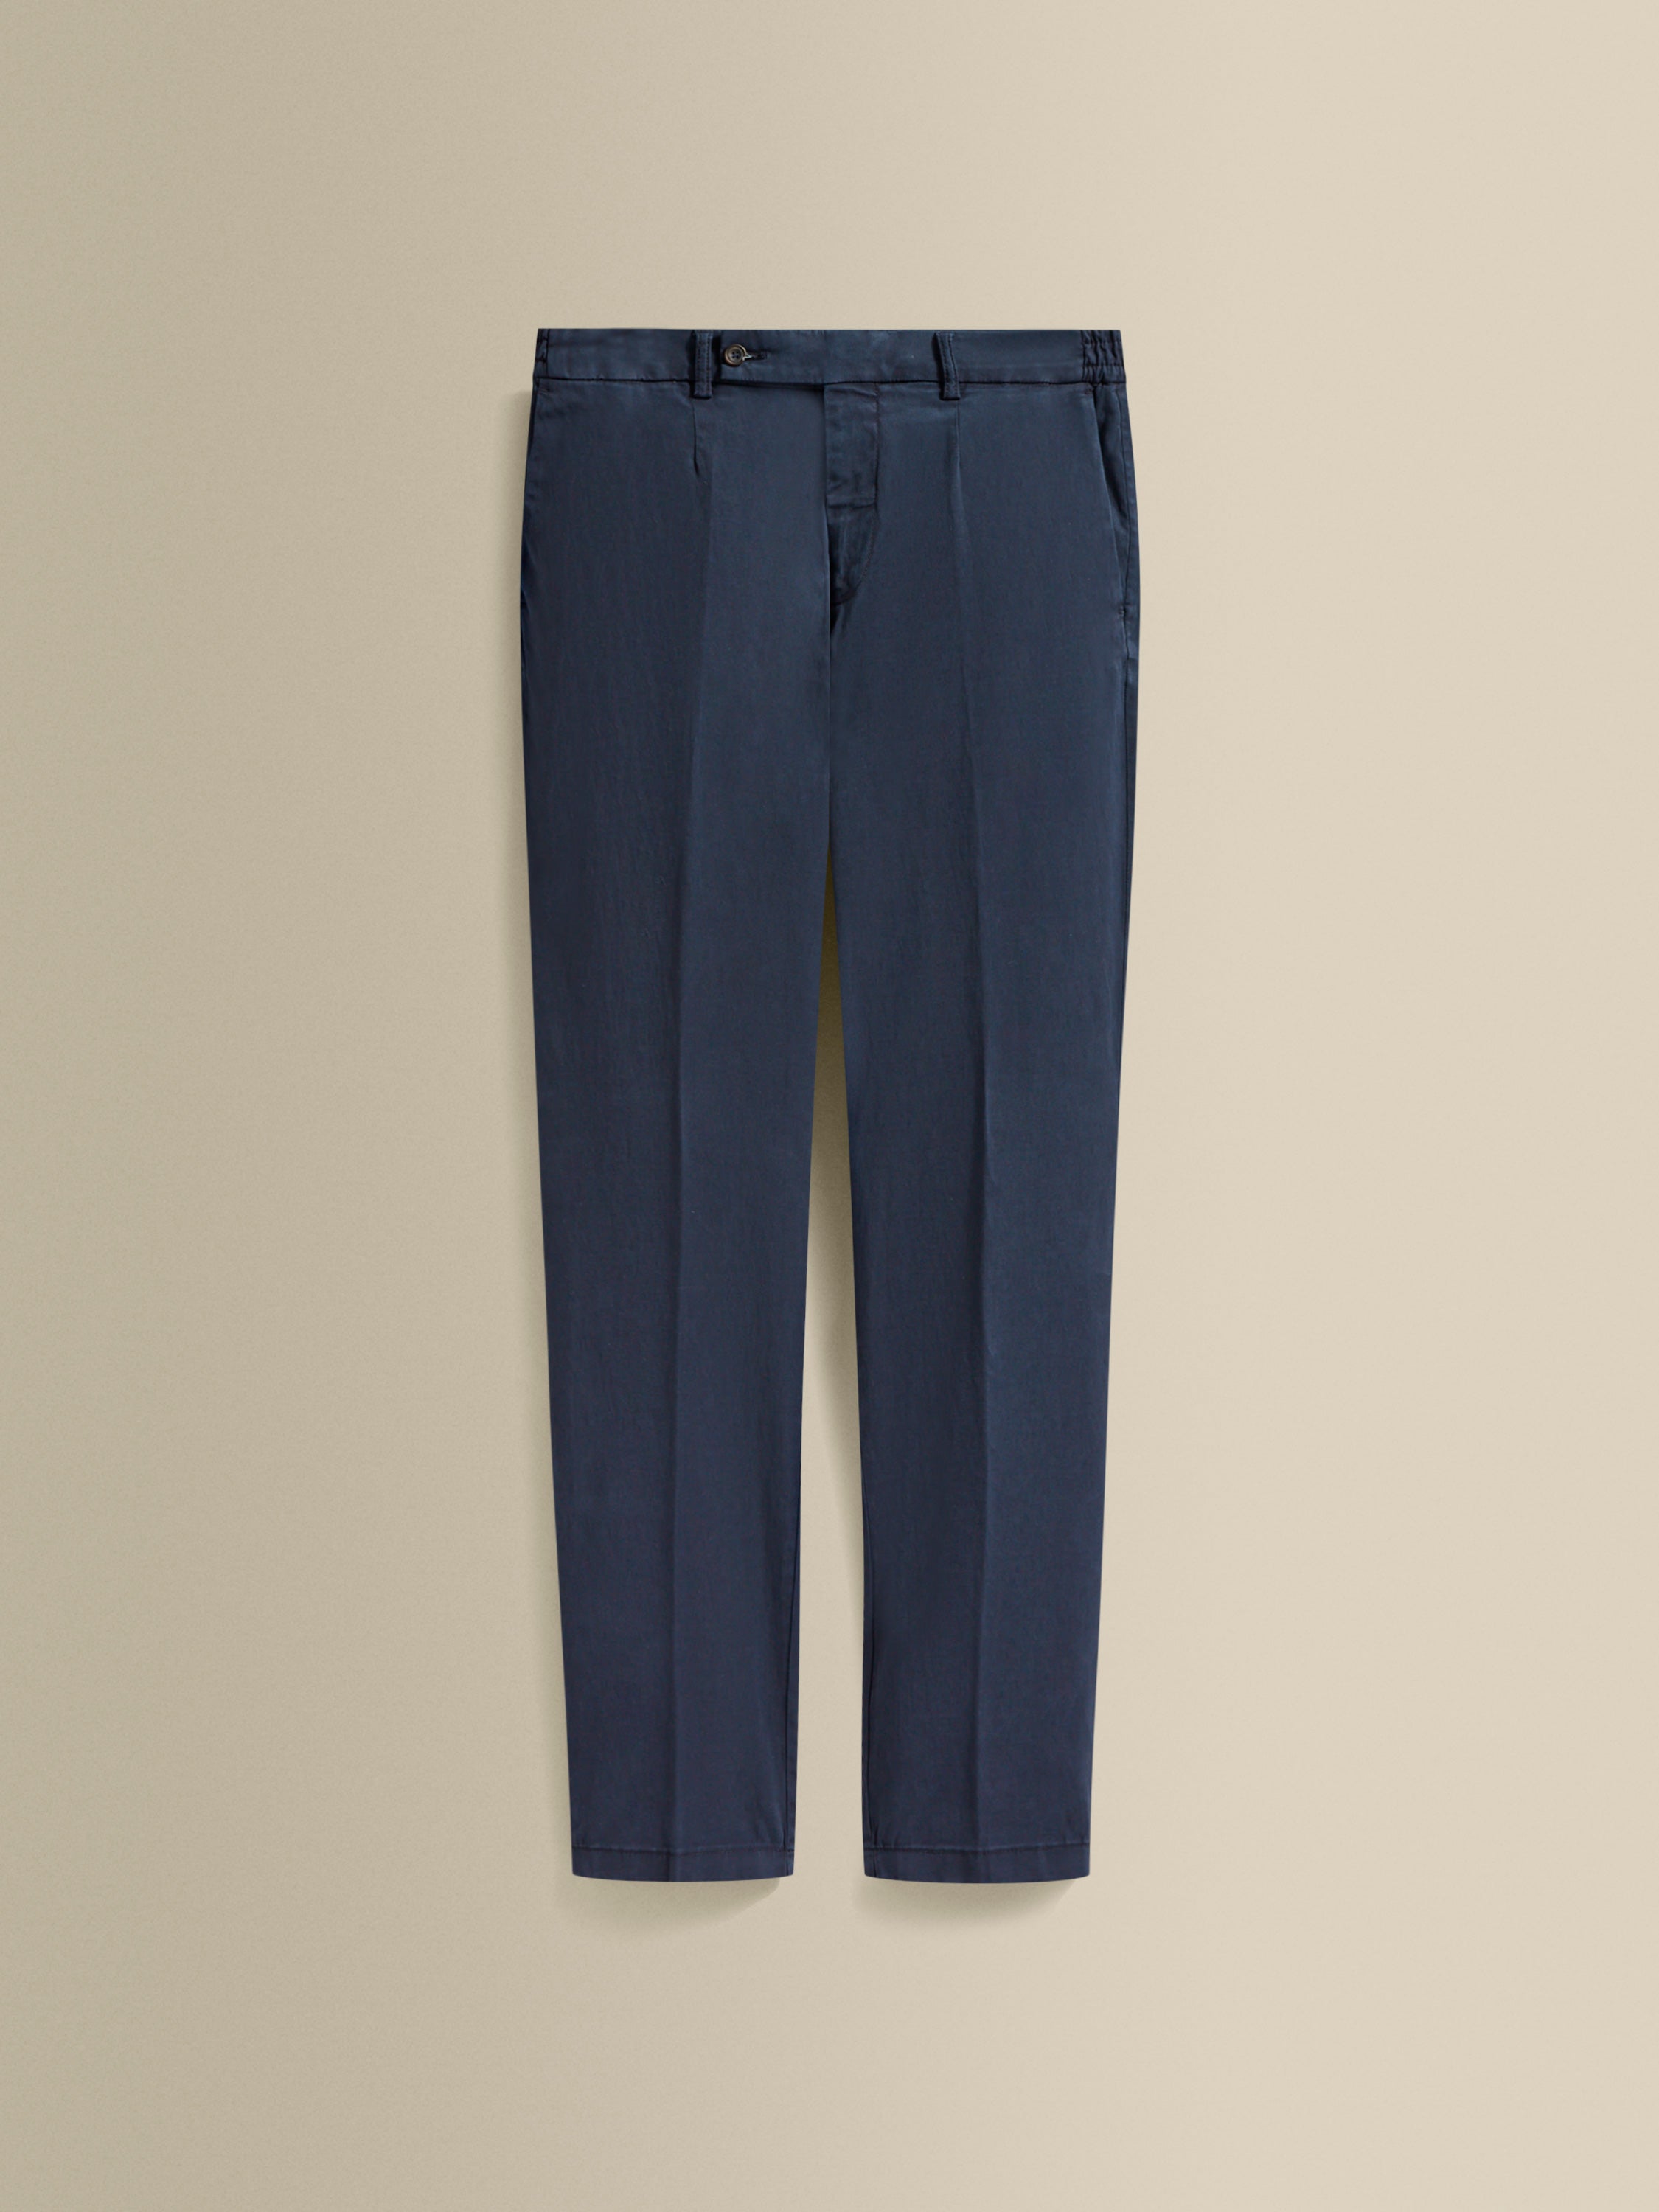 Cotton Easy Fit Flat Front Chinos Navy Product Image